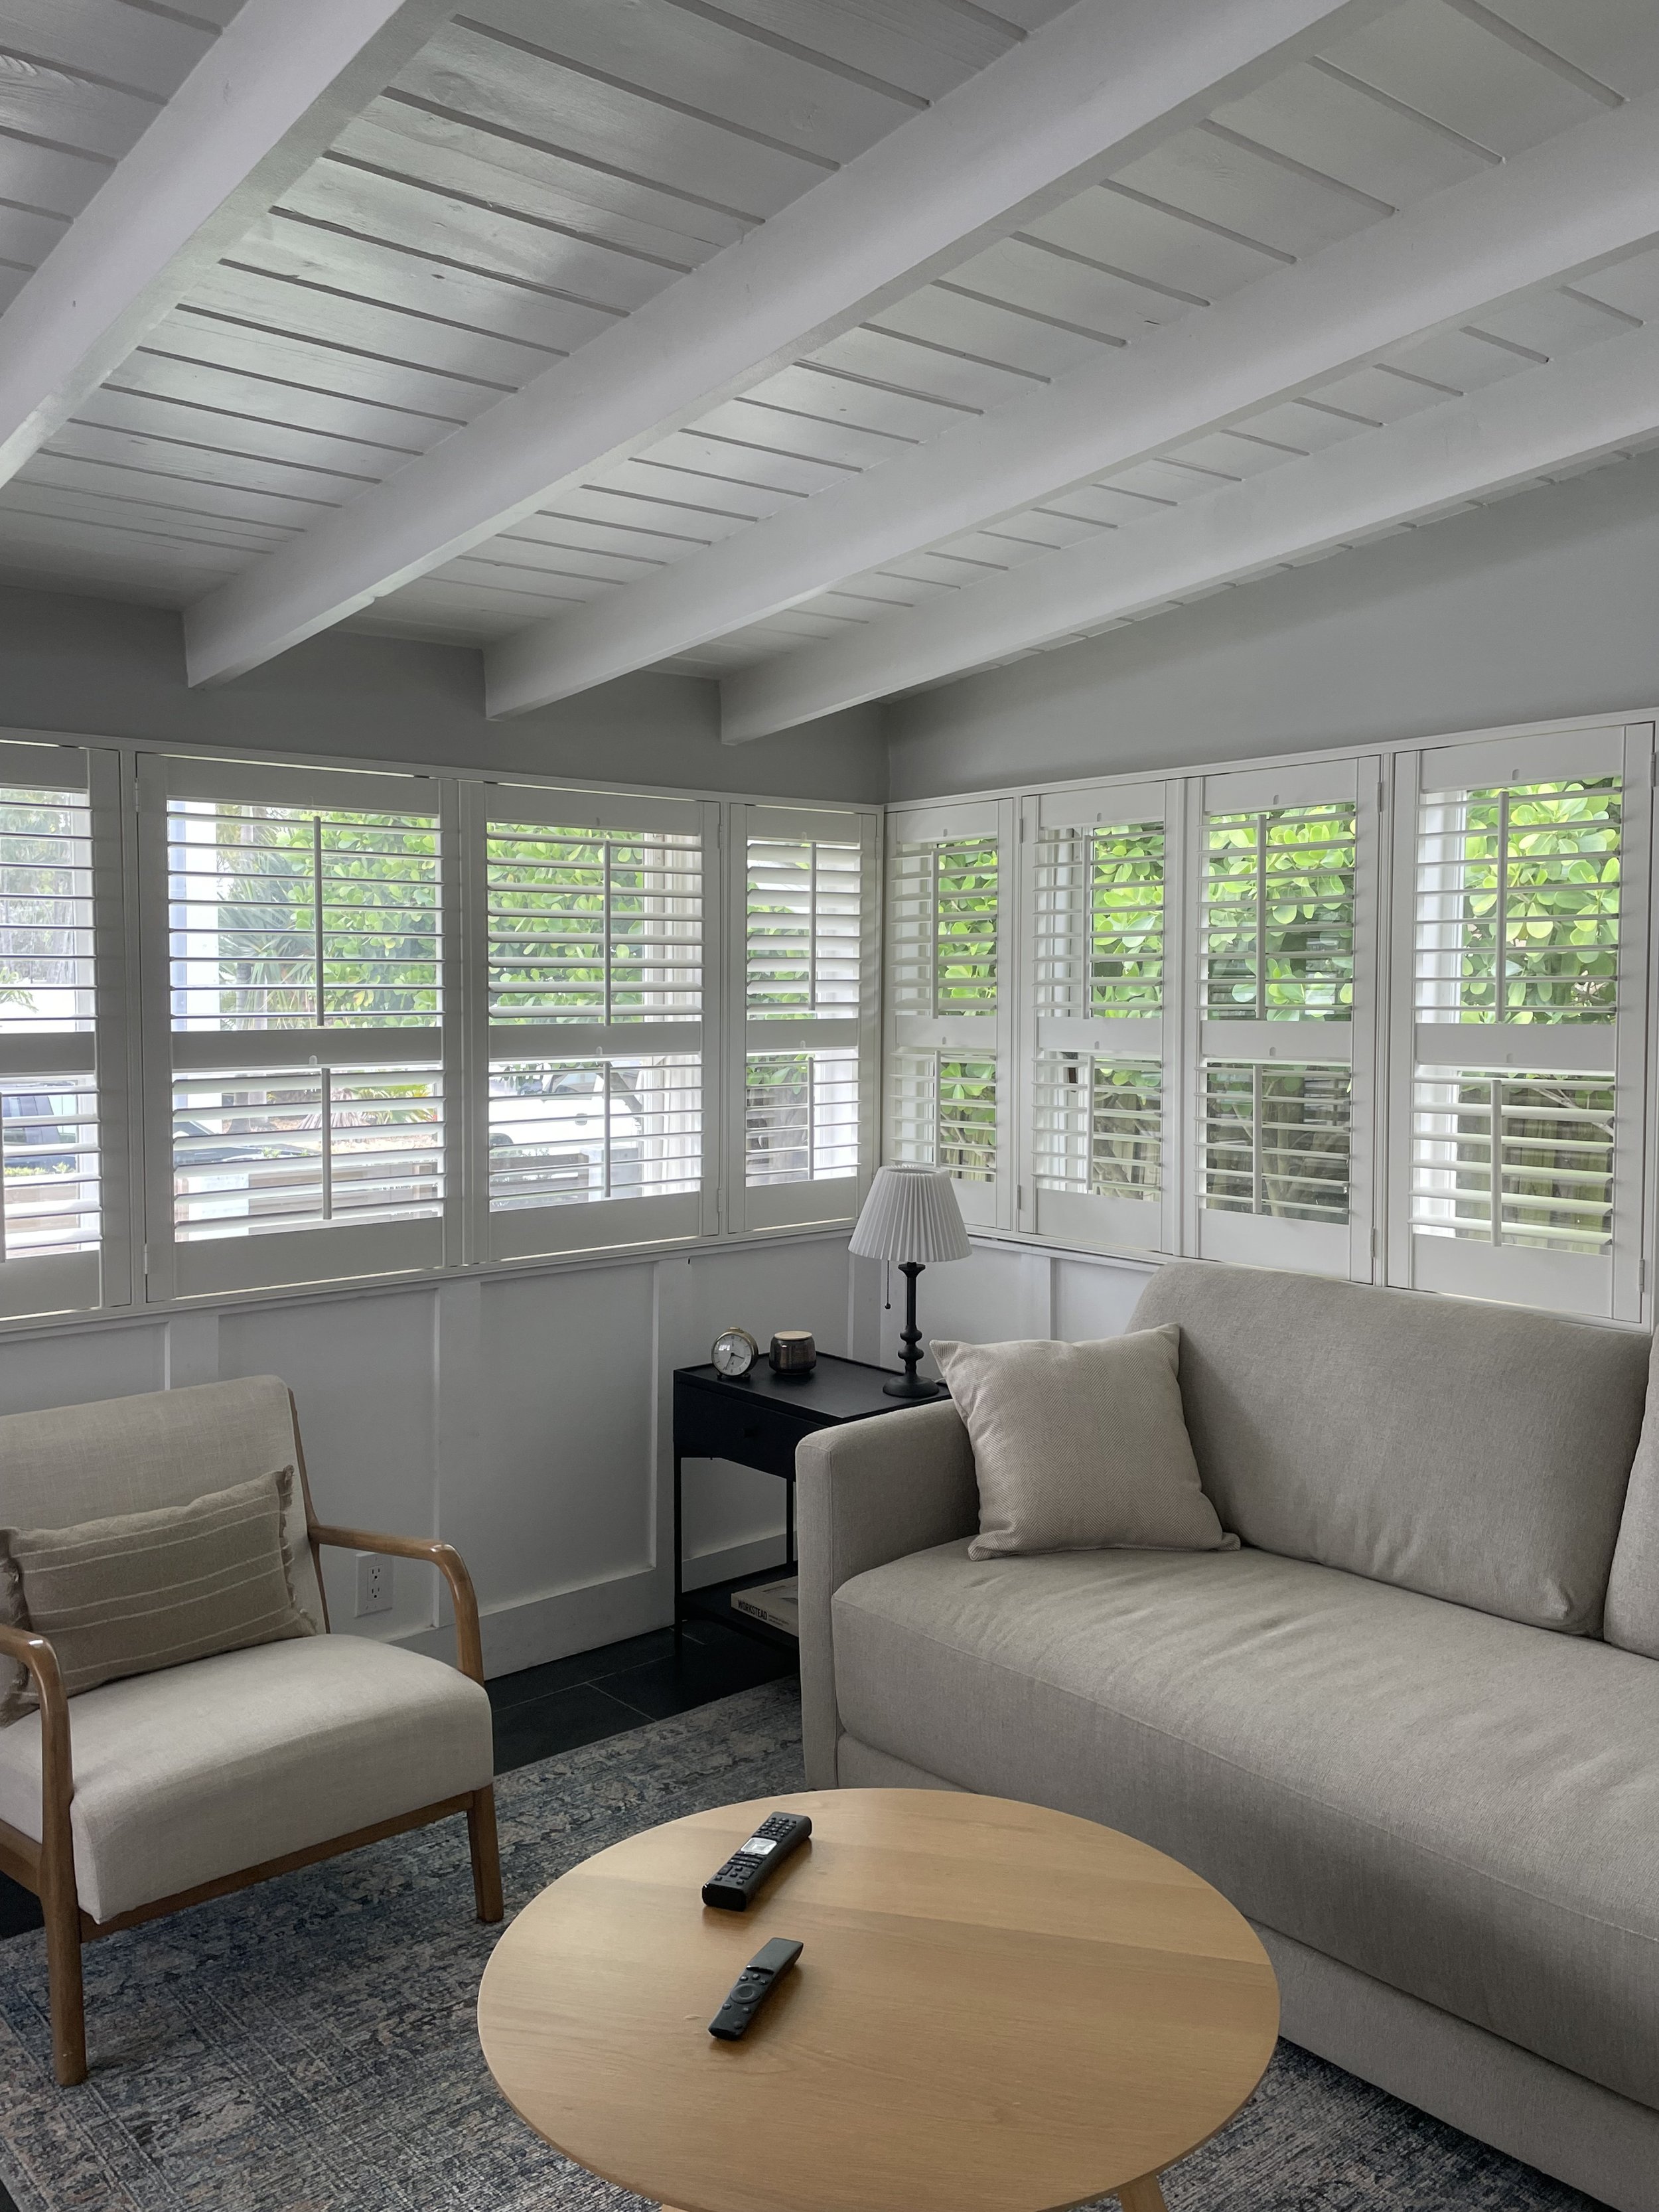 Dear Danica, Should I use curtains or shades? | Window treatment recommendations. When to use curtains vs shades. Window covering guide for low ceilings.